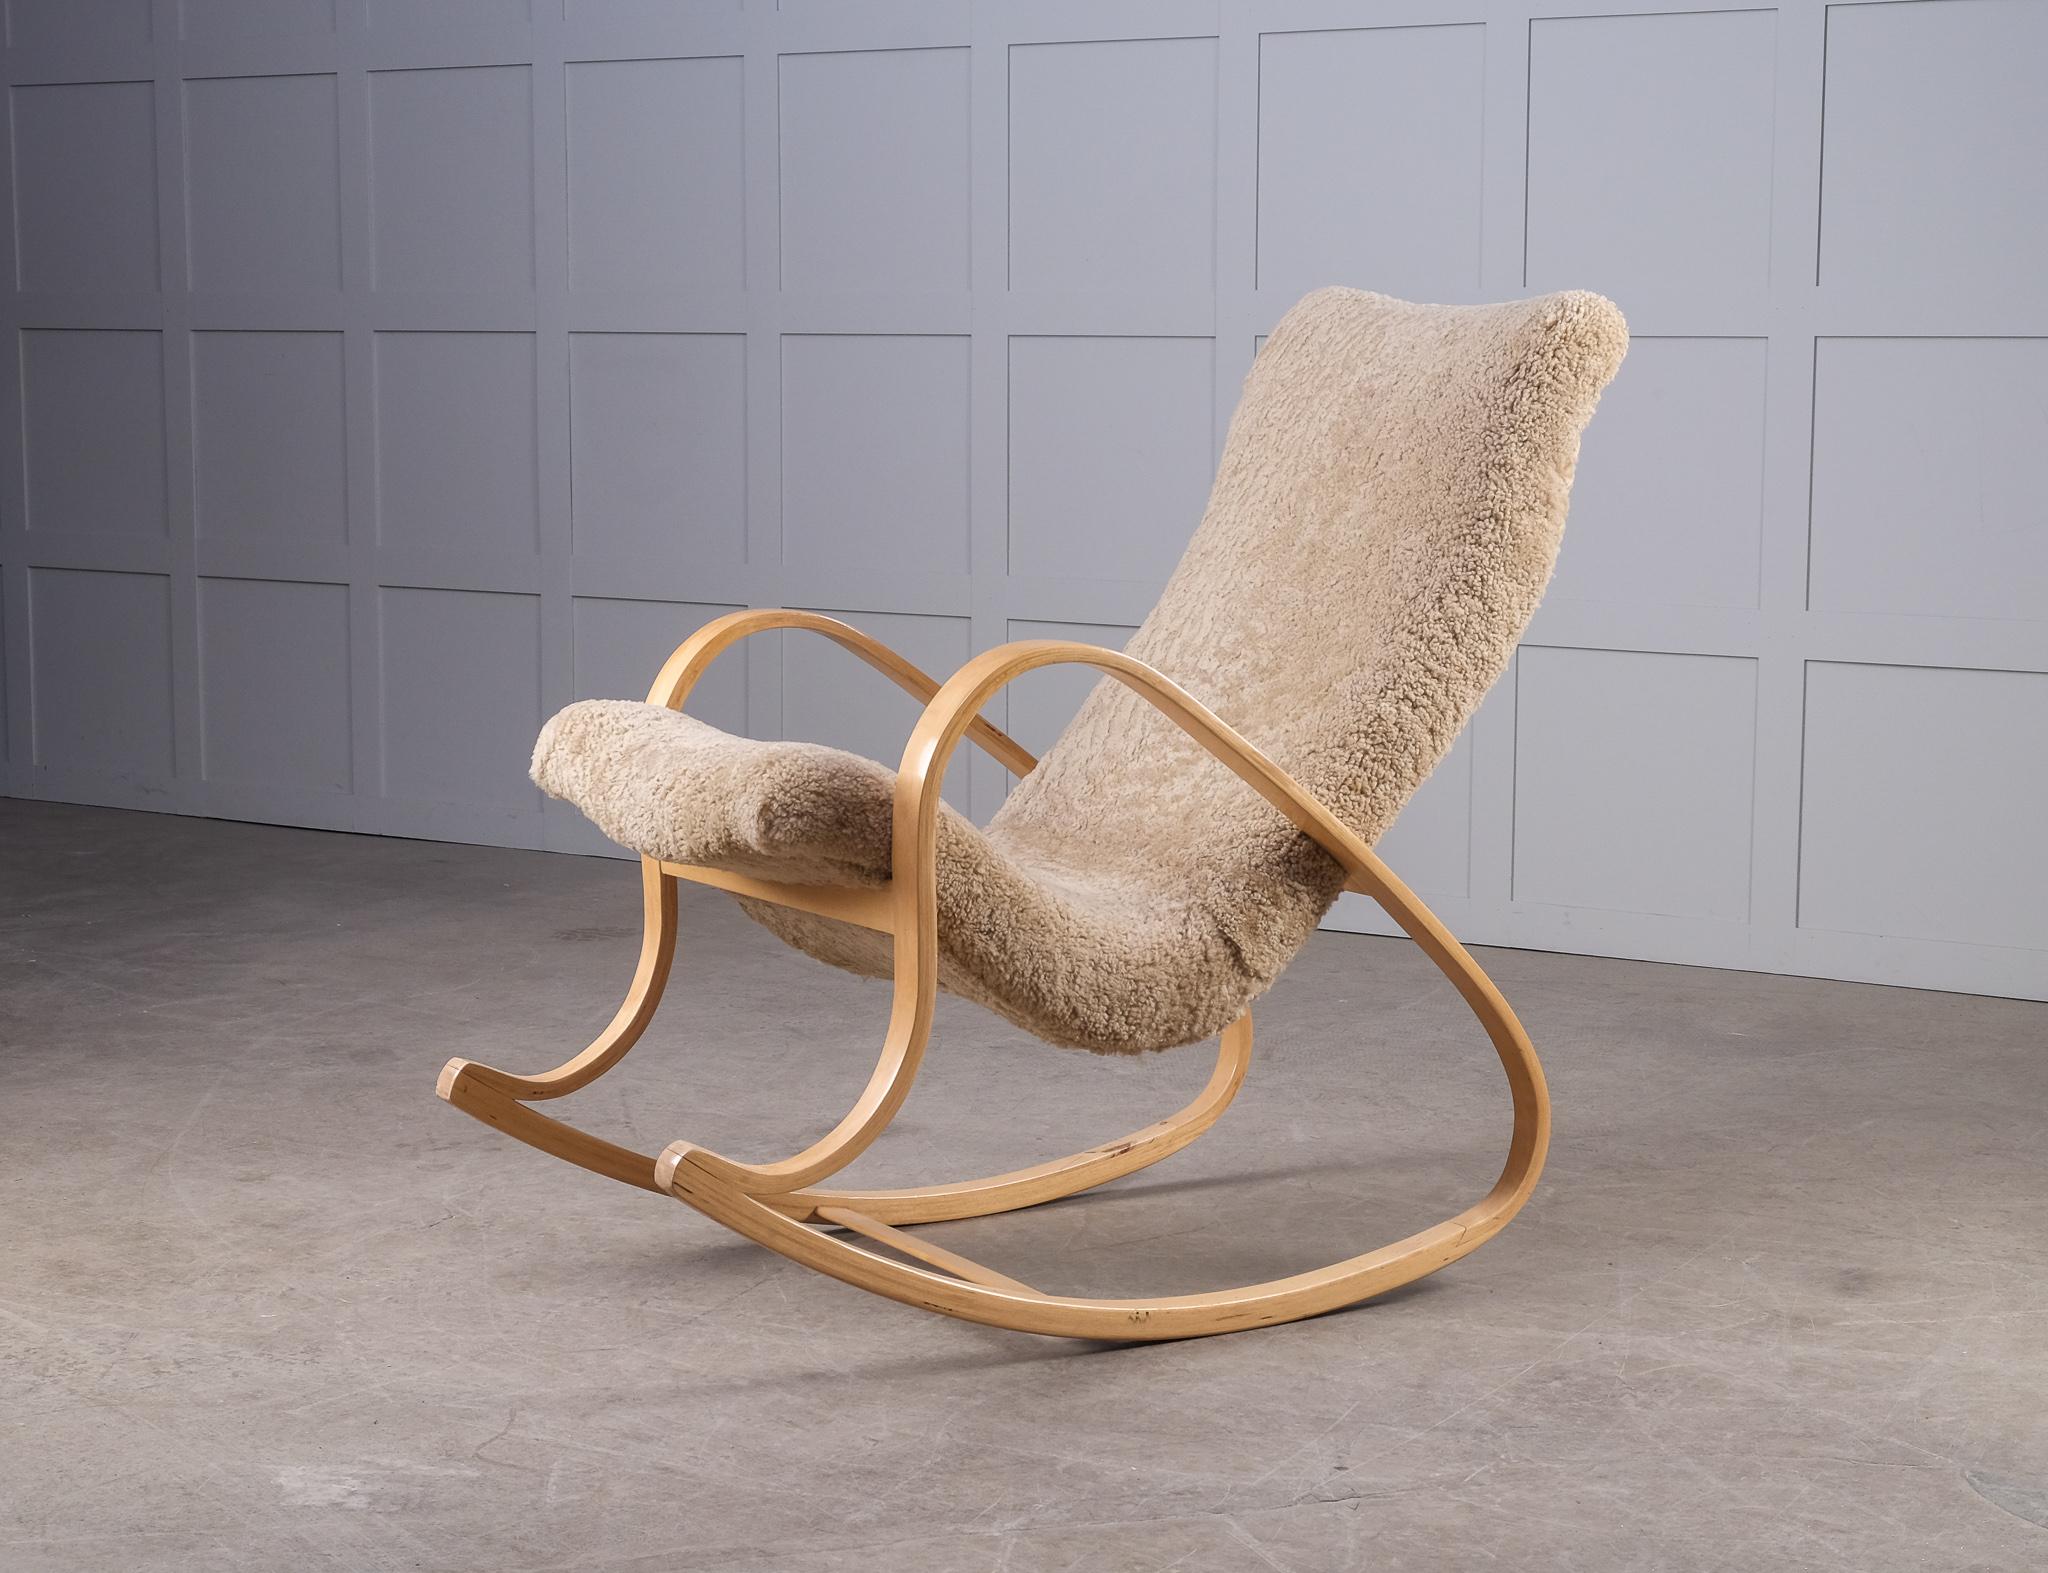 Reupholstered in honey colored sheepskin. Produced in Sweden by Väsby Möbel, 1950s.
This model is represented at Museum of Modern Art in New York.